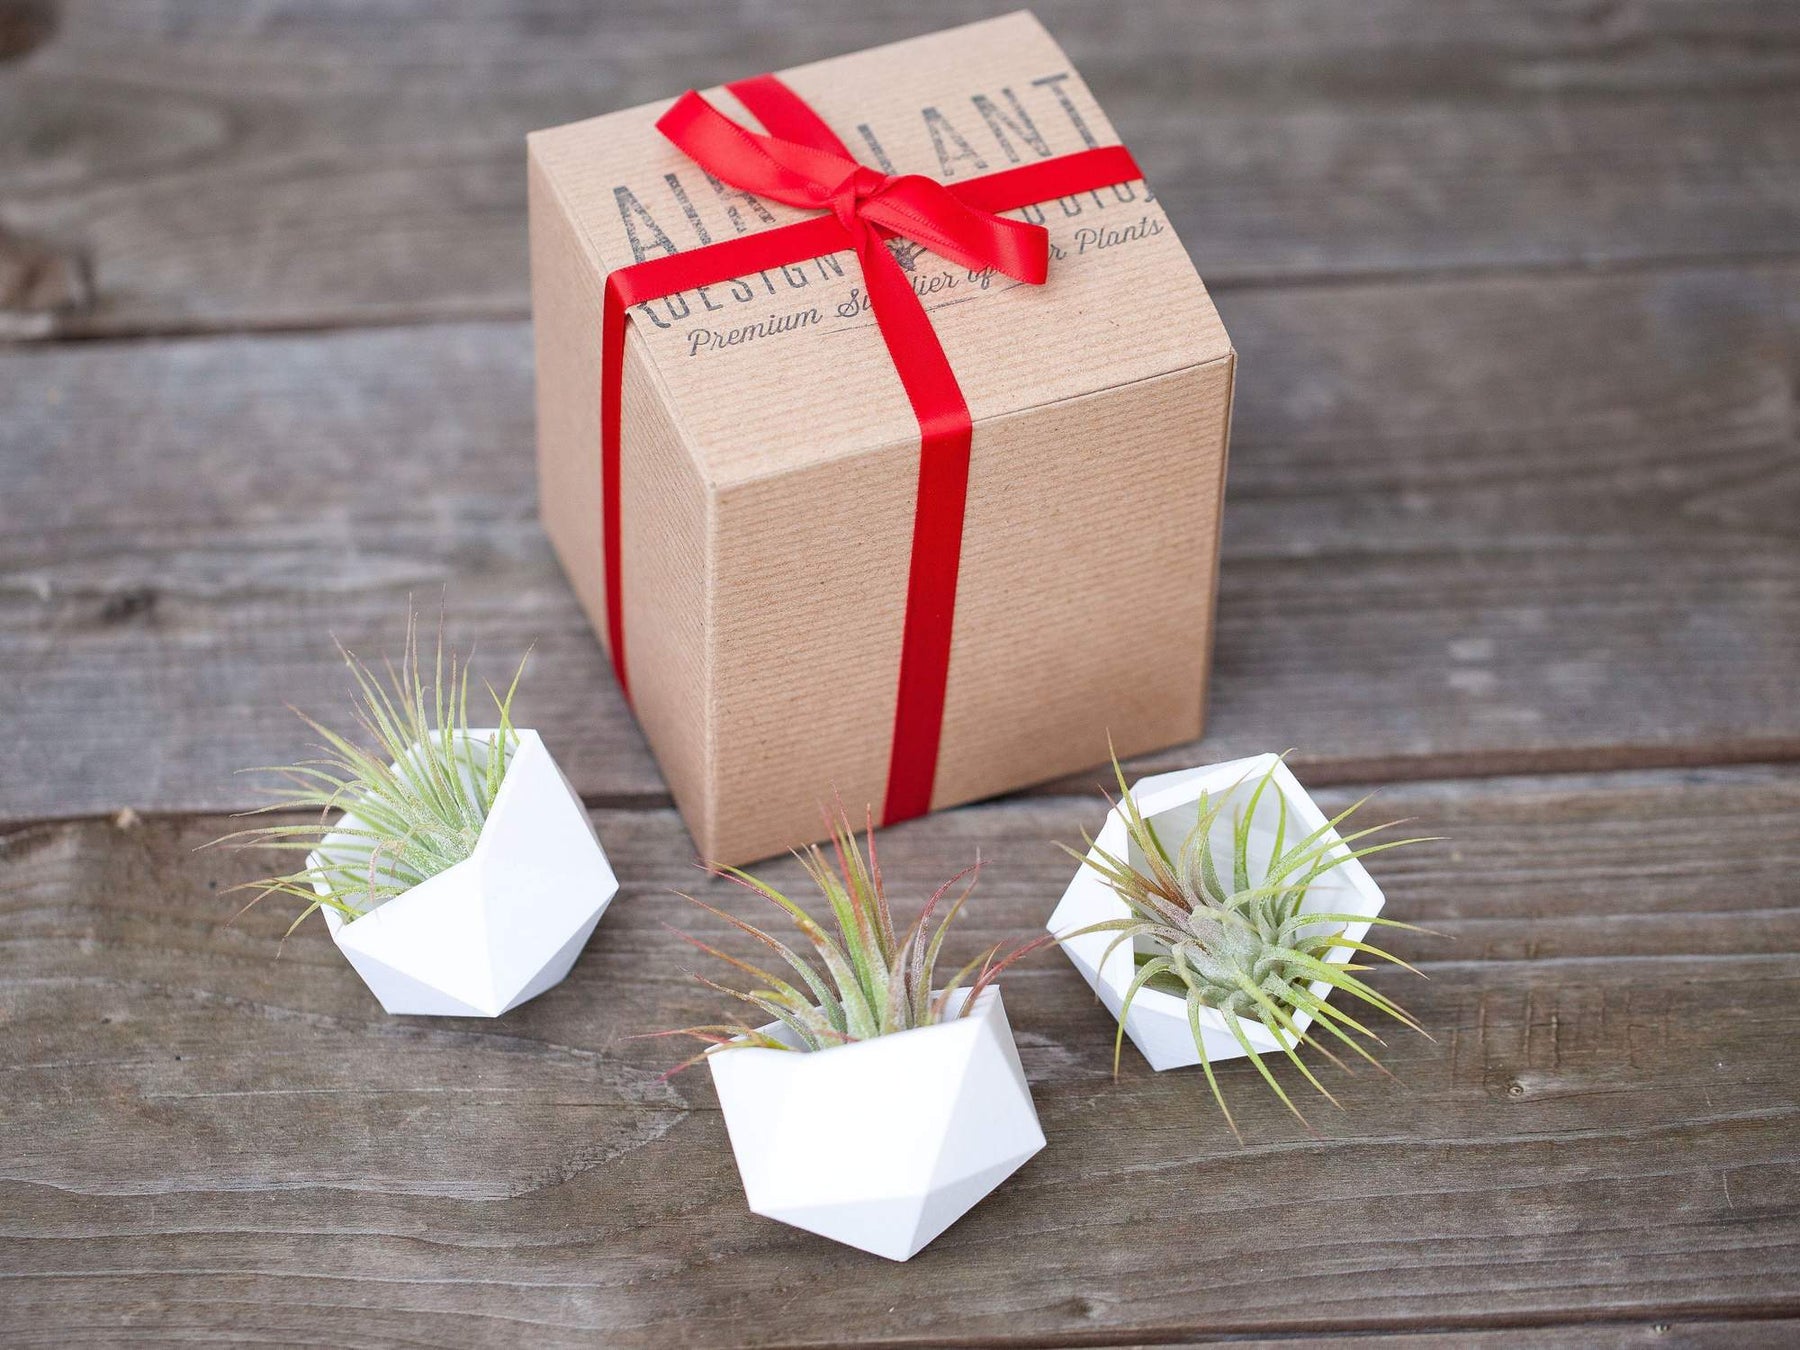 White Geometric Ceramic Planters with Tillandsia Ionantha Air Plants and Branded Gift Box